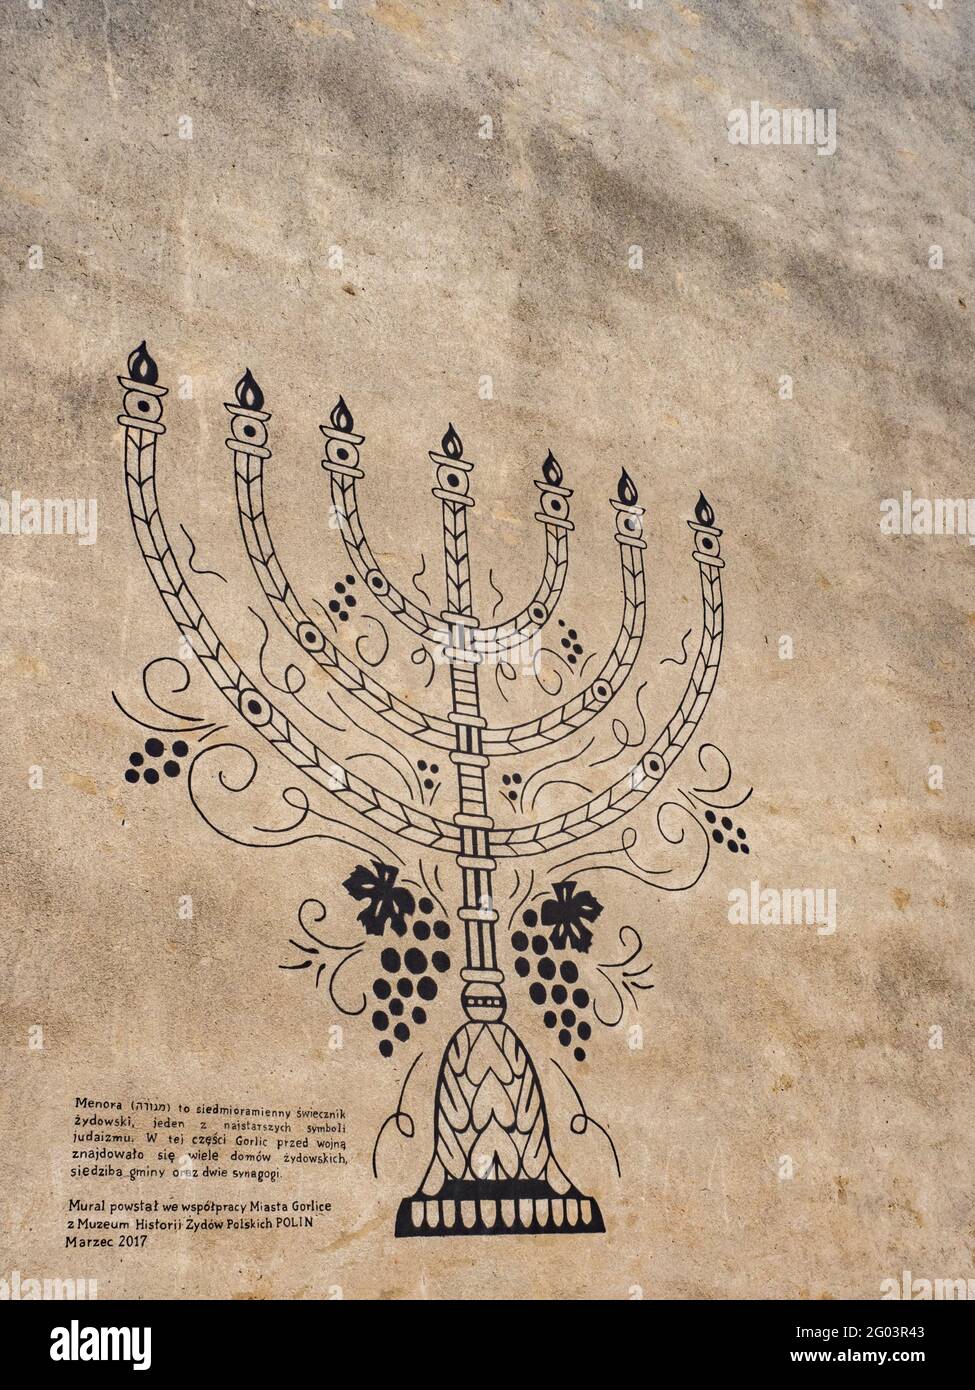 Gorlice, Poland-Aug 2018: Menorah is a seven-branched Jewish candlestick, one of the oldest symbols of Judaism. Mural on the wall of a house in a dist Stock Photo